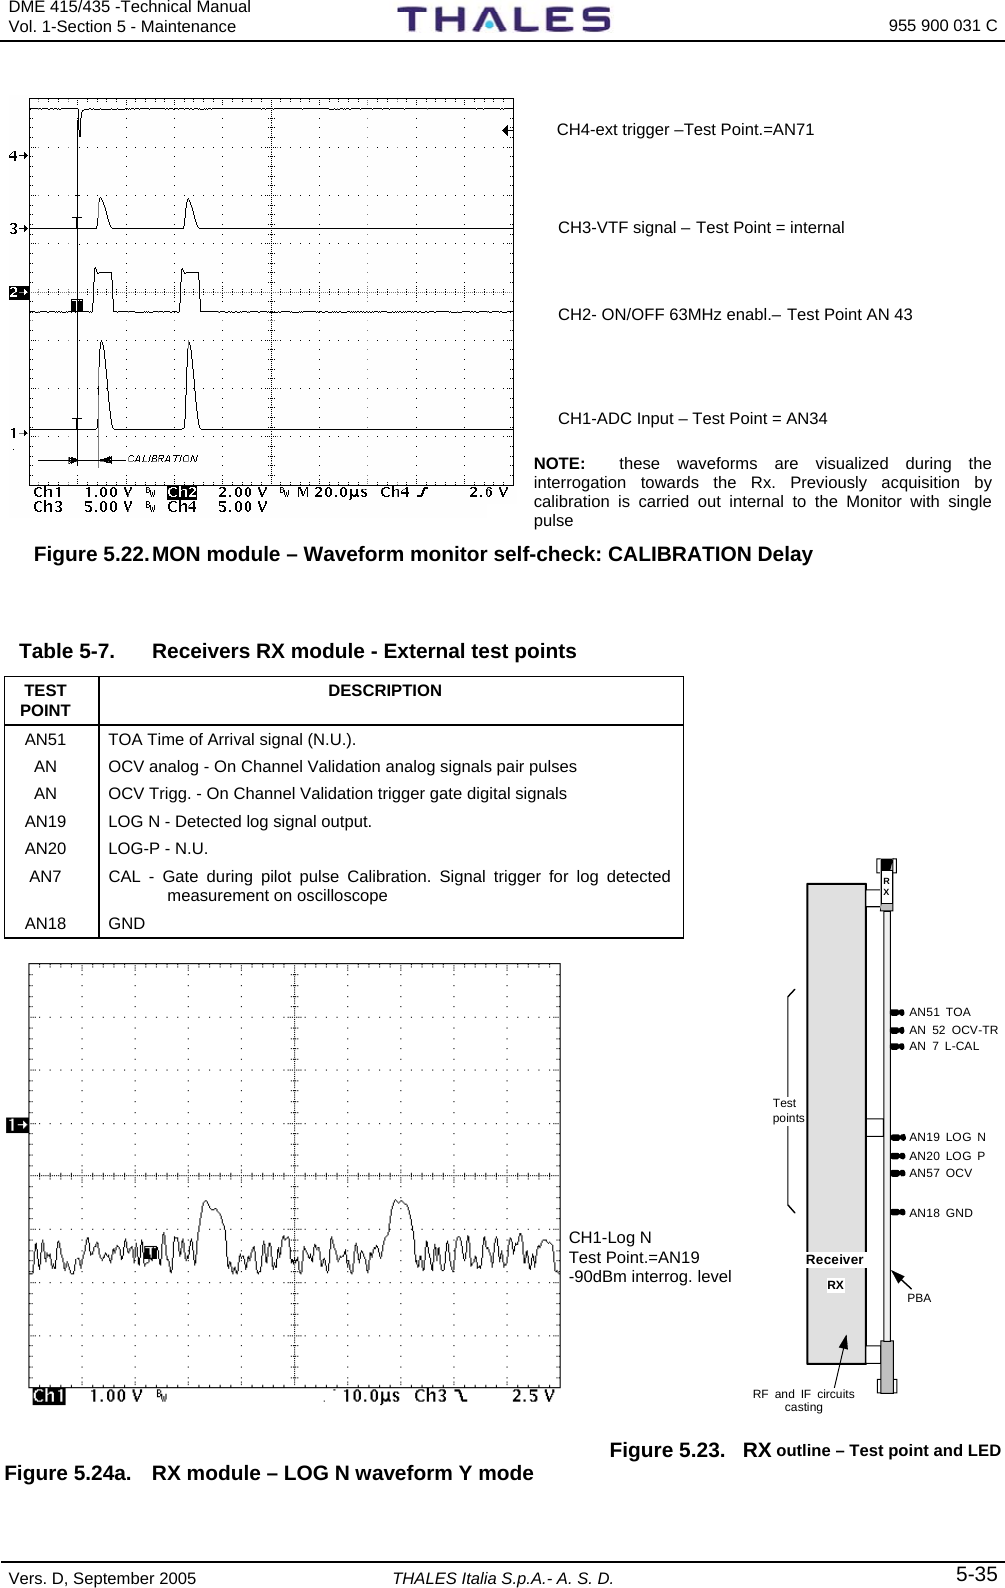 DME 415/435 -Technical Manual Vol. 1-Section 5 - Maintenance    955 900 031 C Vers. D, September 2005  THALES Italia S.p.A.- A. S. D. 5-35    Figure 5.22. MON module – Waveform monitor self-check: CALIBRATION Delay   Table 5-7.  Receivers RX module - External test points  TEST POINT  DESCRIPTION AN51  TOA Time of Arrival signal (N.U.). AN  OCV analog - On Channel Validation analog signals pair pulses AN  OCV Trigg. - On Channel Validation trigger gate digital signals  AN19  LOG N - Detected log signal output. AN20 LOG-P - N.U. AN7  CAL - Gate during pilot pulse Calibration. Signal trigger for log detected measurement on oscilloscope AN18 GND     Figure 5.23. RX outline – Test point and LED  Figure 5.24a.  RX module – LOG N waveform Y mode CH4-ext trigger –Test Point.=AN71  CH3-VTF signal – Test Point = internal  CH2- ON/OFF 63MHz enabl.– Test Point AN 43  CH1-ADC Input – Test Point = AN34  CH1-Log N  Test Point.=AN19 -90dBm interrog. level AN 52 OCV-TRReceiver AN57 OCVAN19 LOG NAN20 LOG PAN18 GNDPBARXAN51 TOARXRF and IF circuitscasting Test pointsAN 7 L-CALNOTE:  these waveforms are visualized during the interrogation towards the Rx. Previously acquisition by calibration is carried out internal to the Monitor with single pulse 